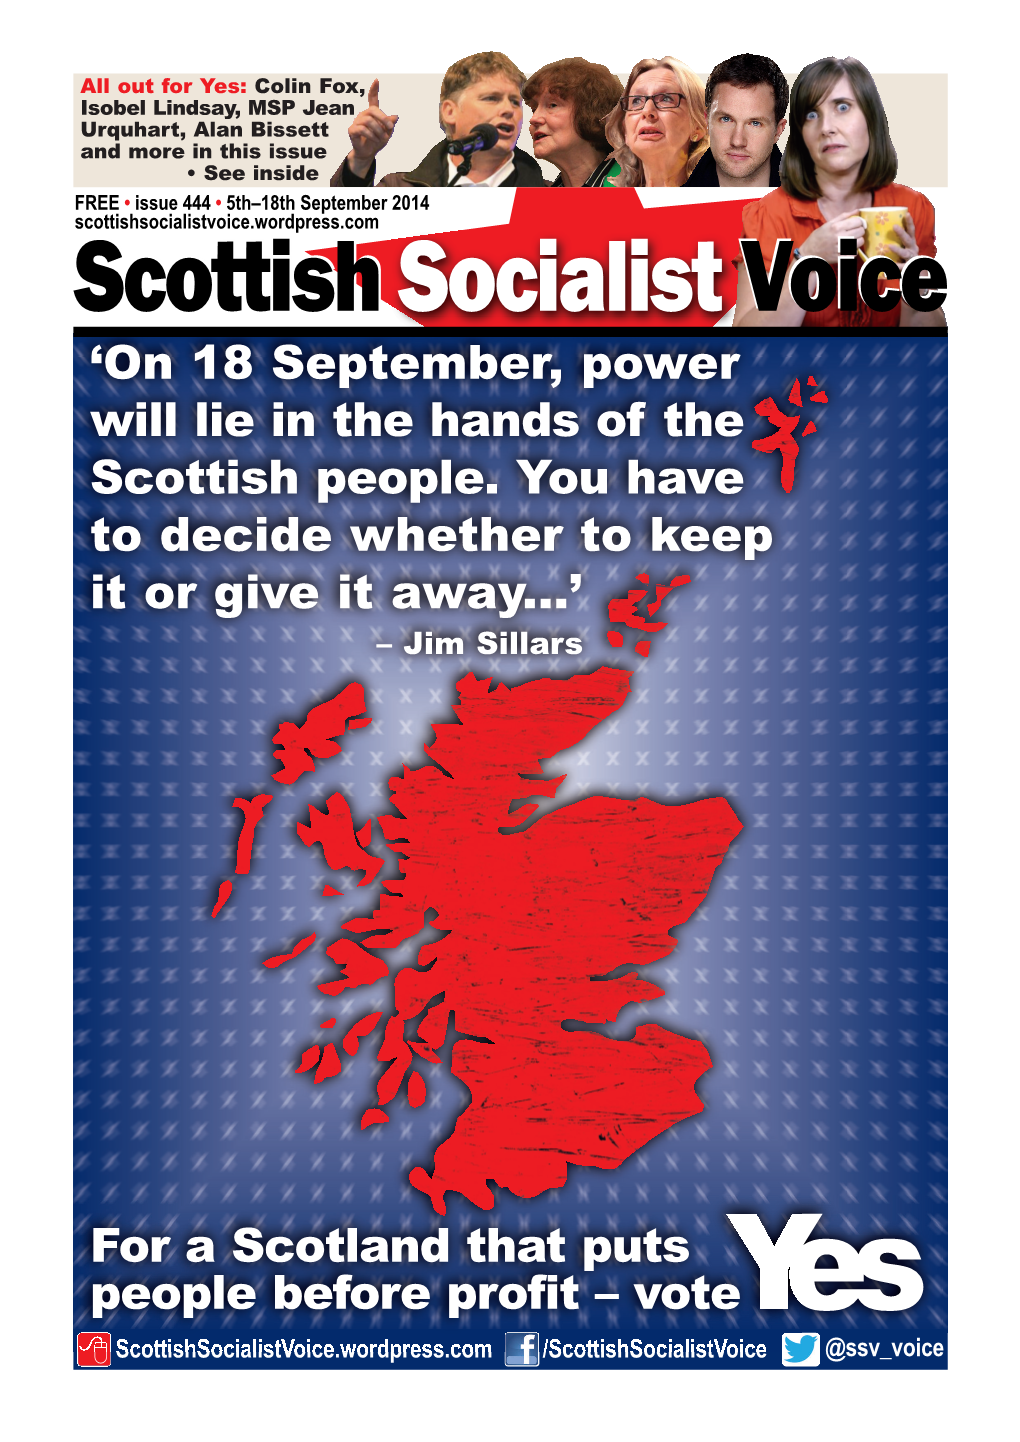 On 18 September, Power Will Lie in the Hands of the Scottish People